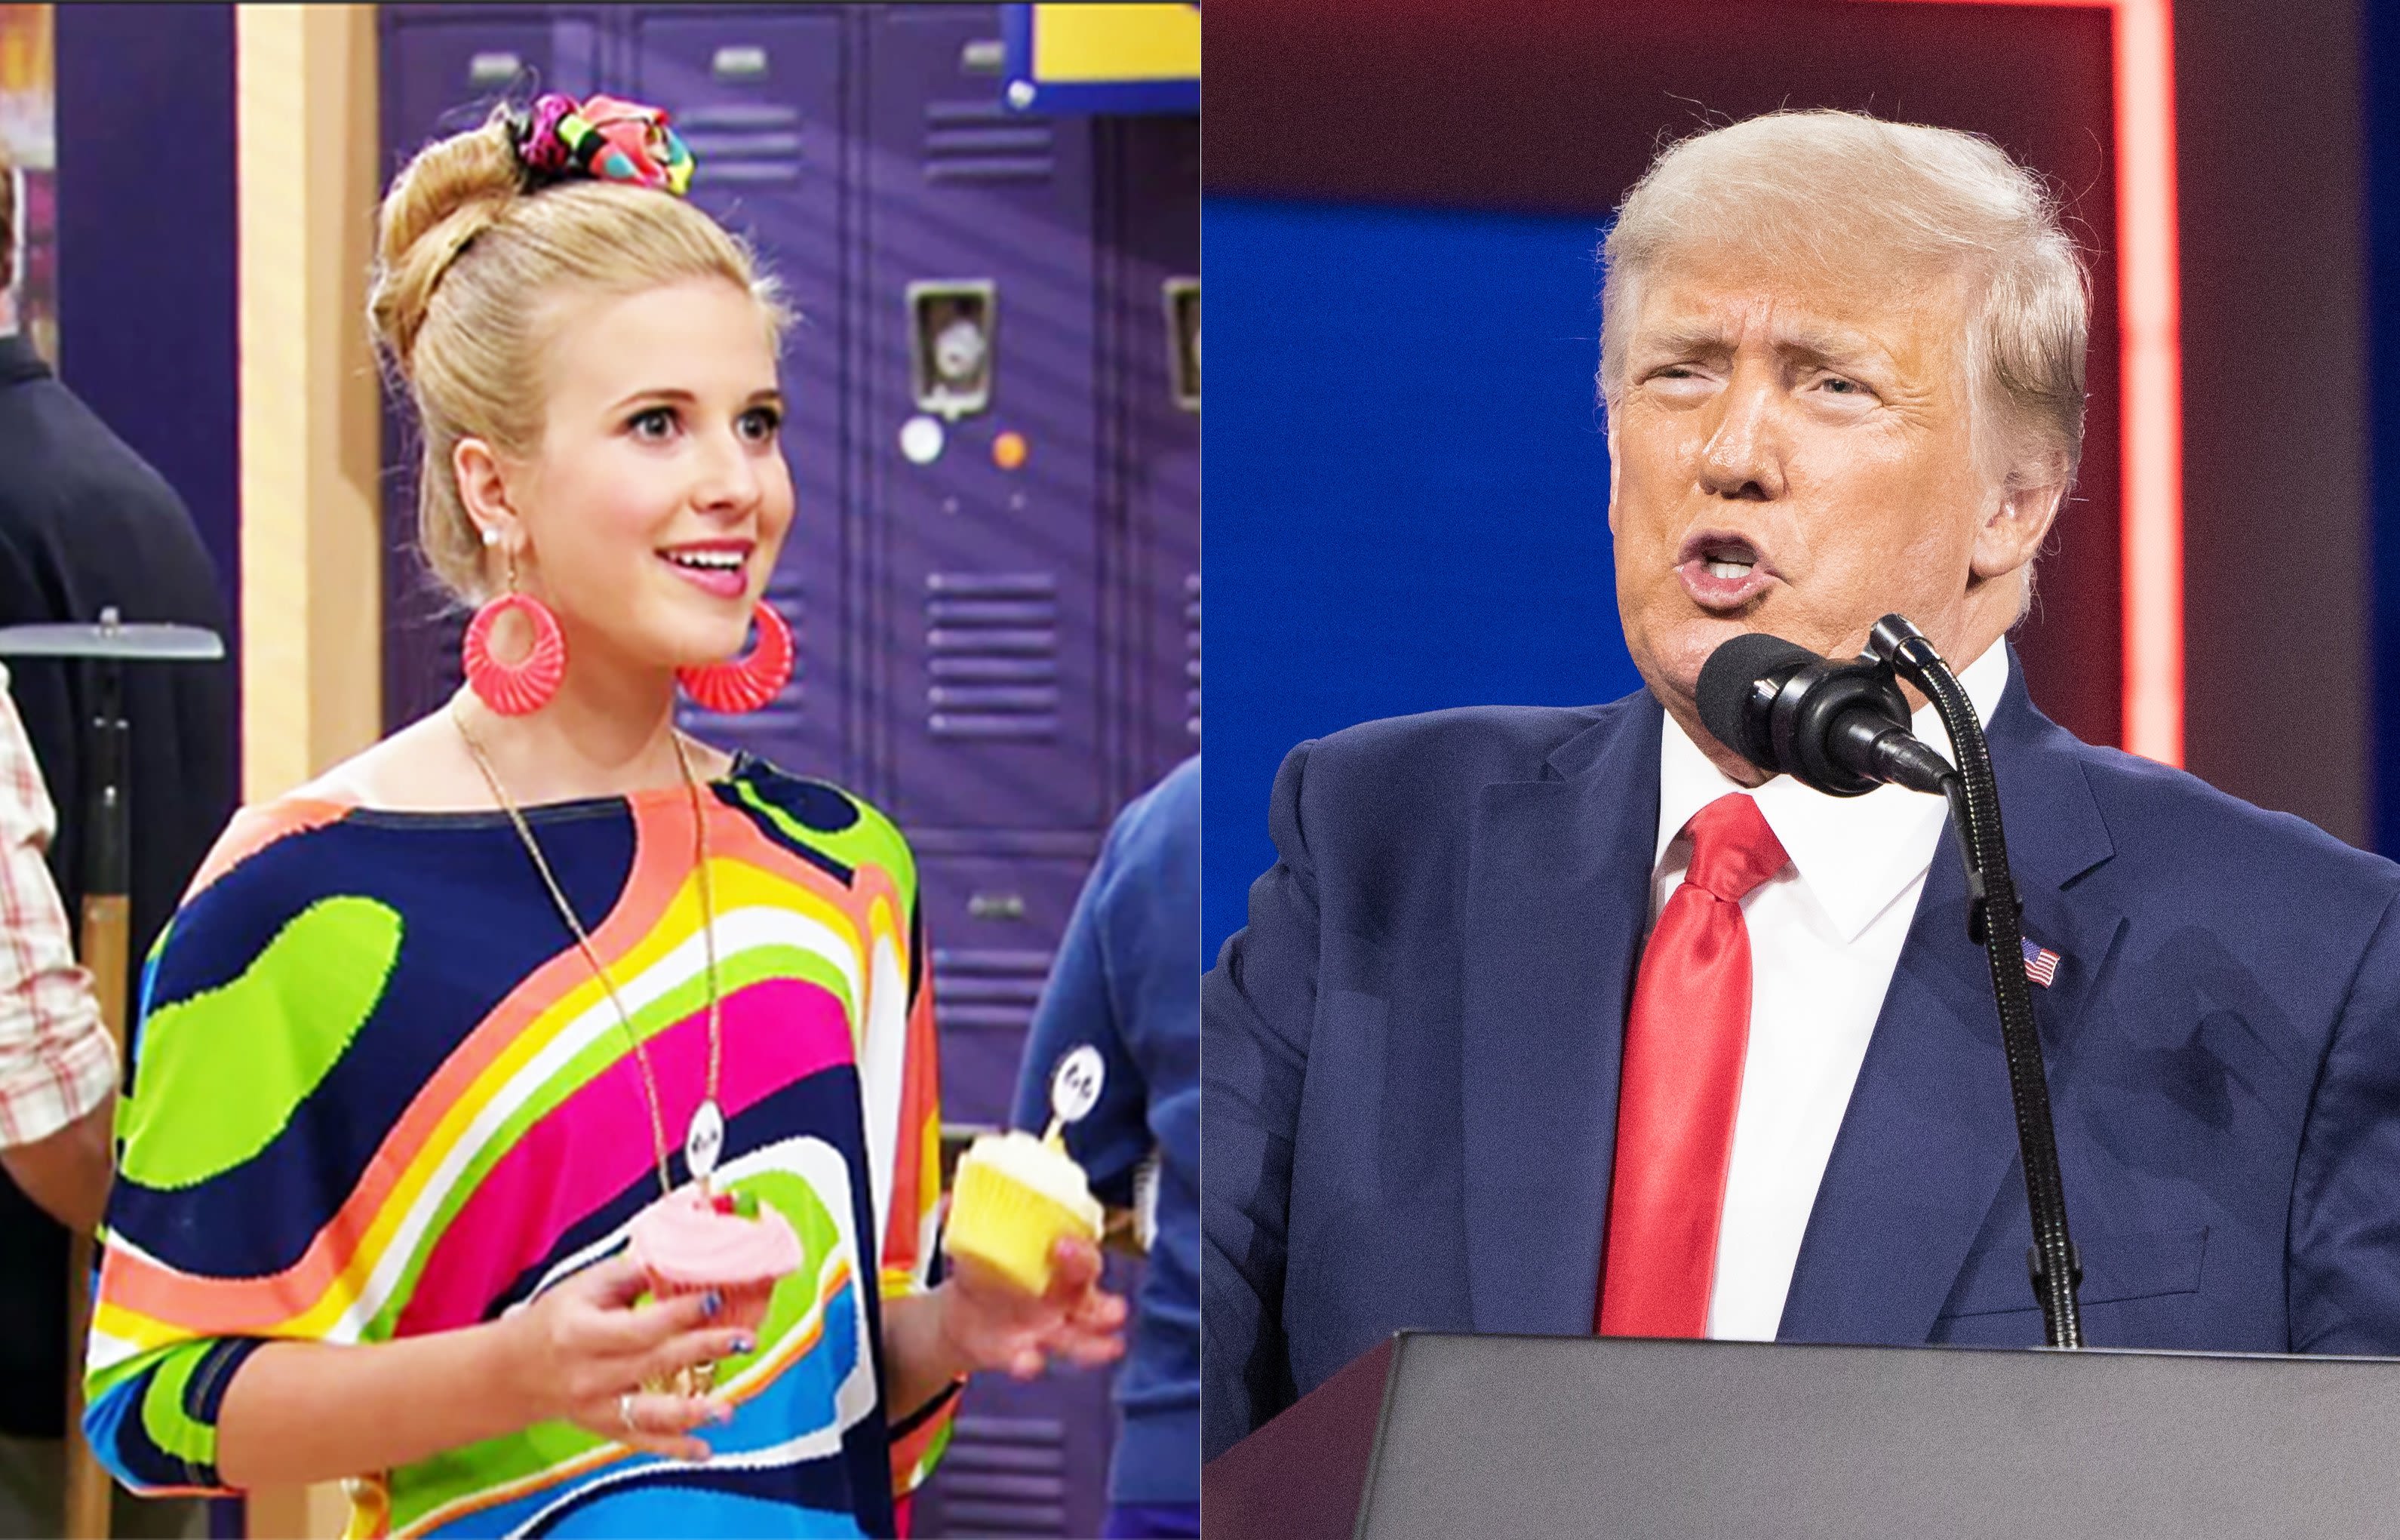 This former Disney star is working for Trump & the internet is ROASTING while we cackle